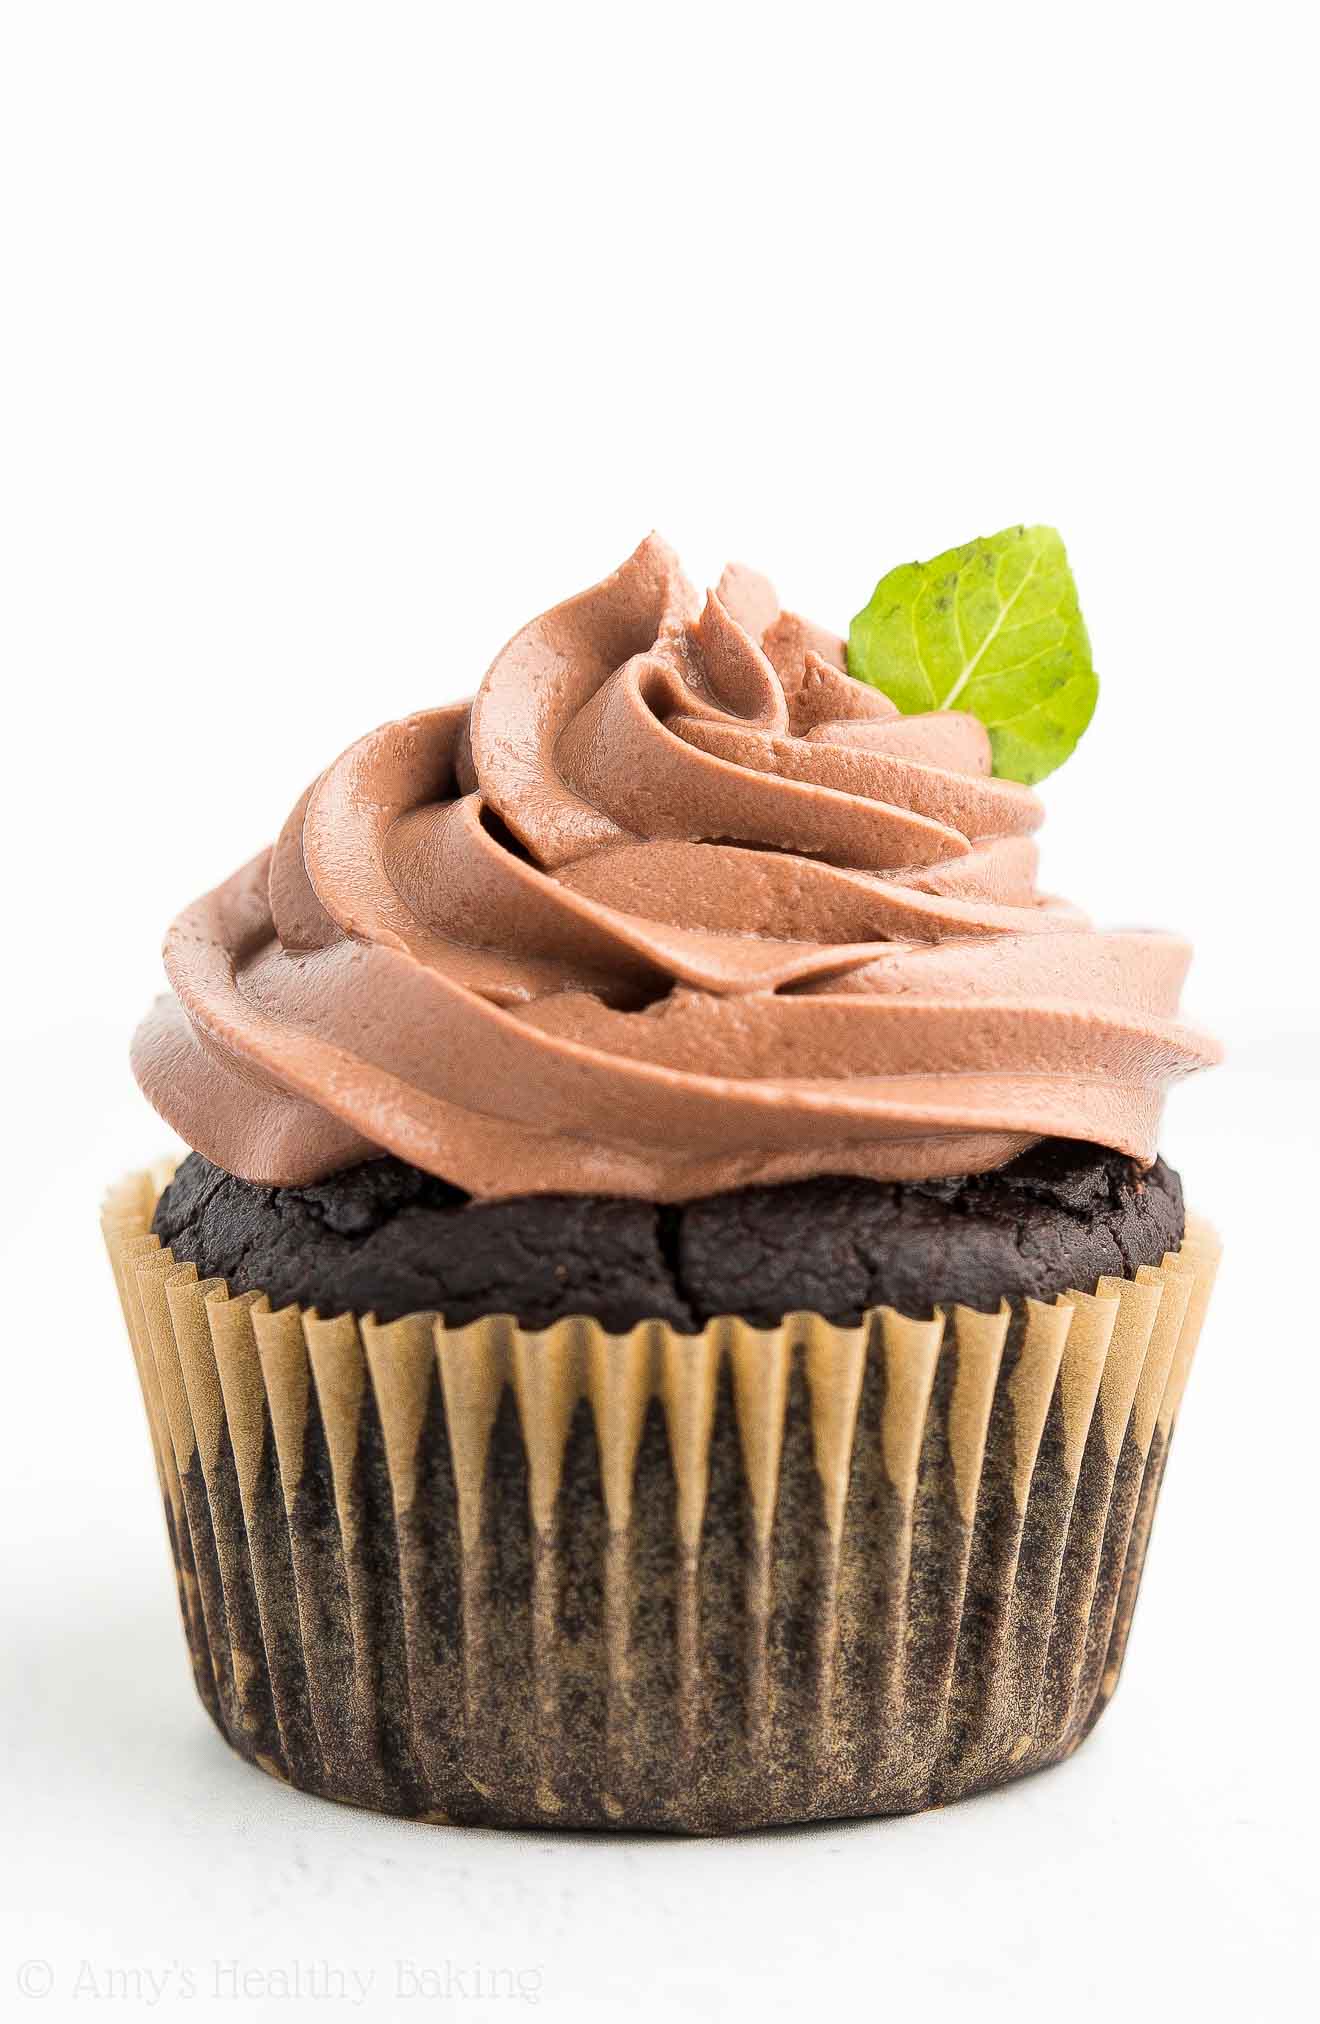 Healthy Mint Chocolate Cupcakes | Amy's Healthy Baking